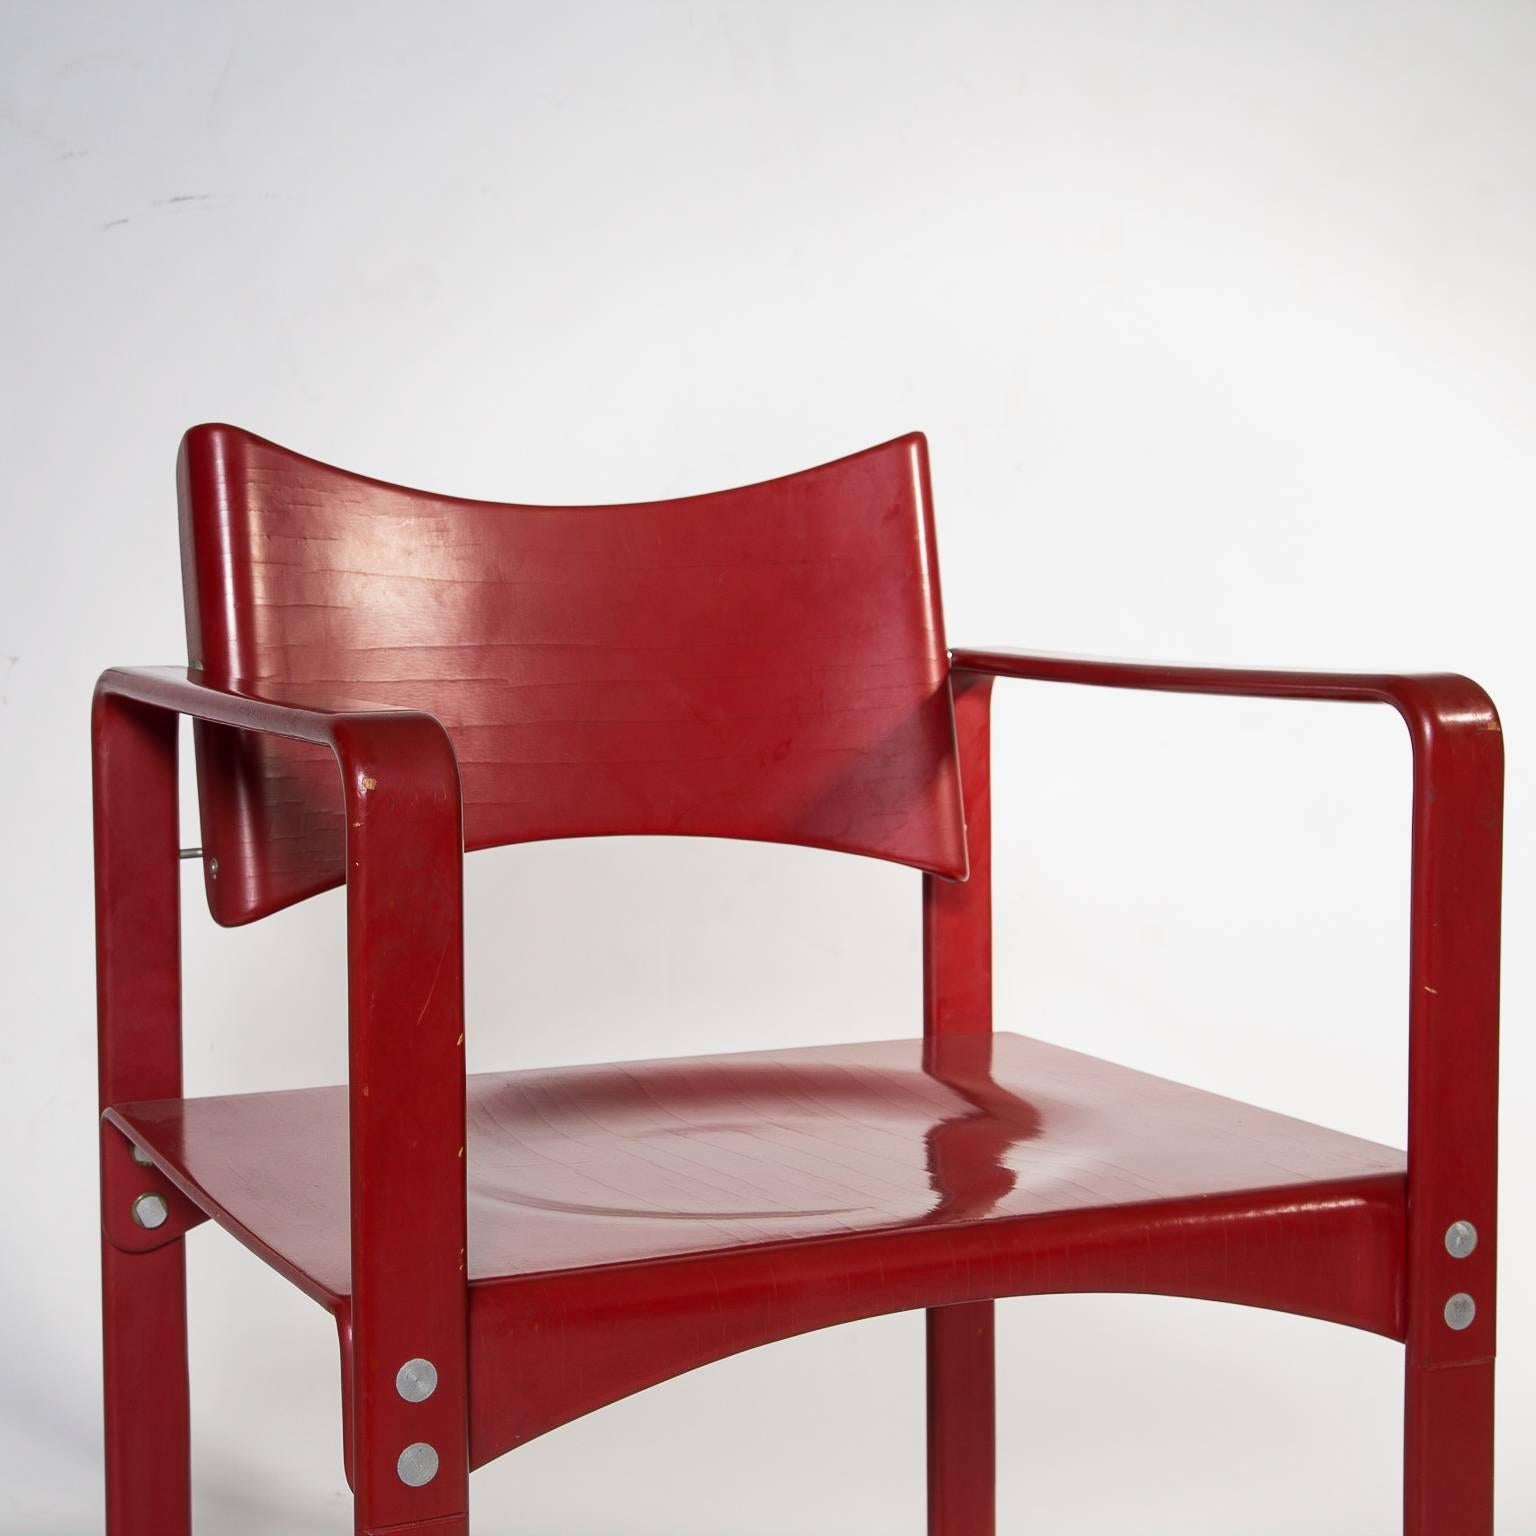 Red Verner Panton No. 271 Dining Chair for Thonet, Germany, circa 1970 In Good Condition For Sale In Vienna, AT